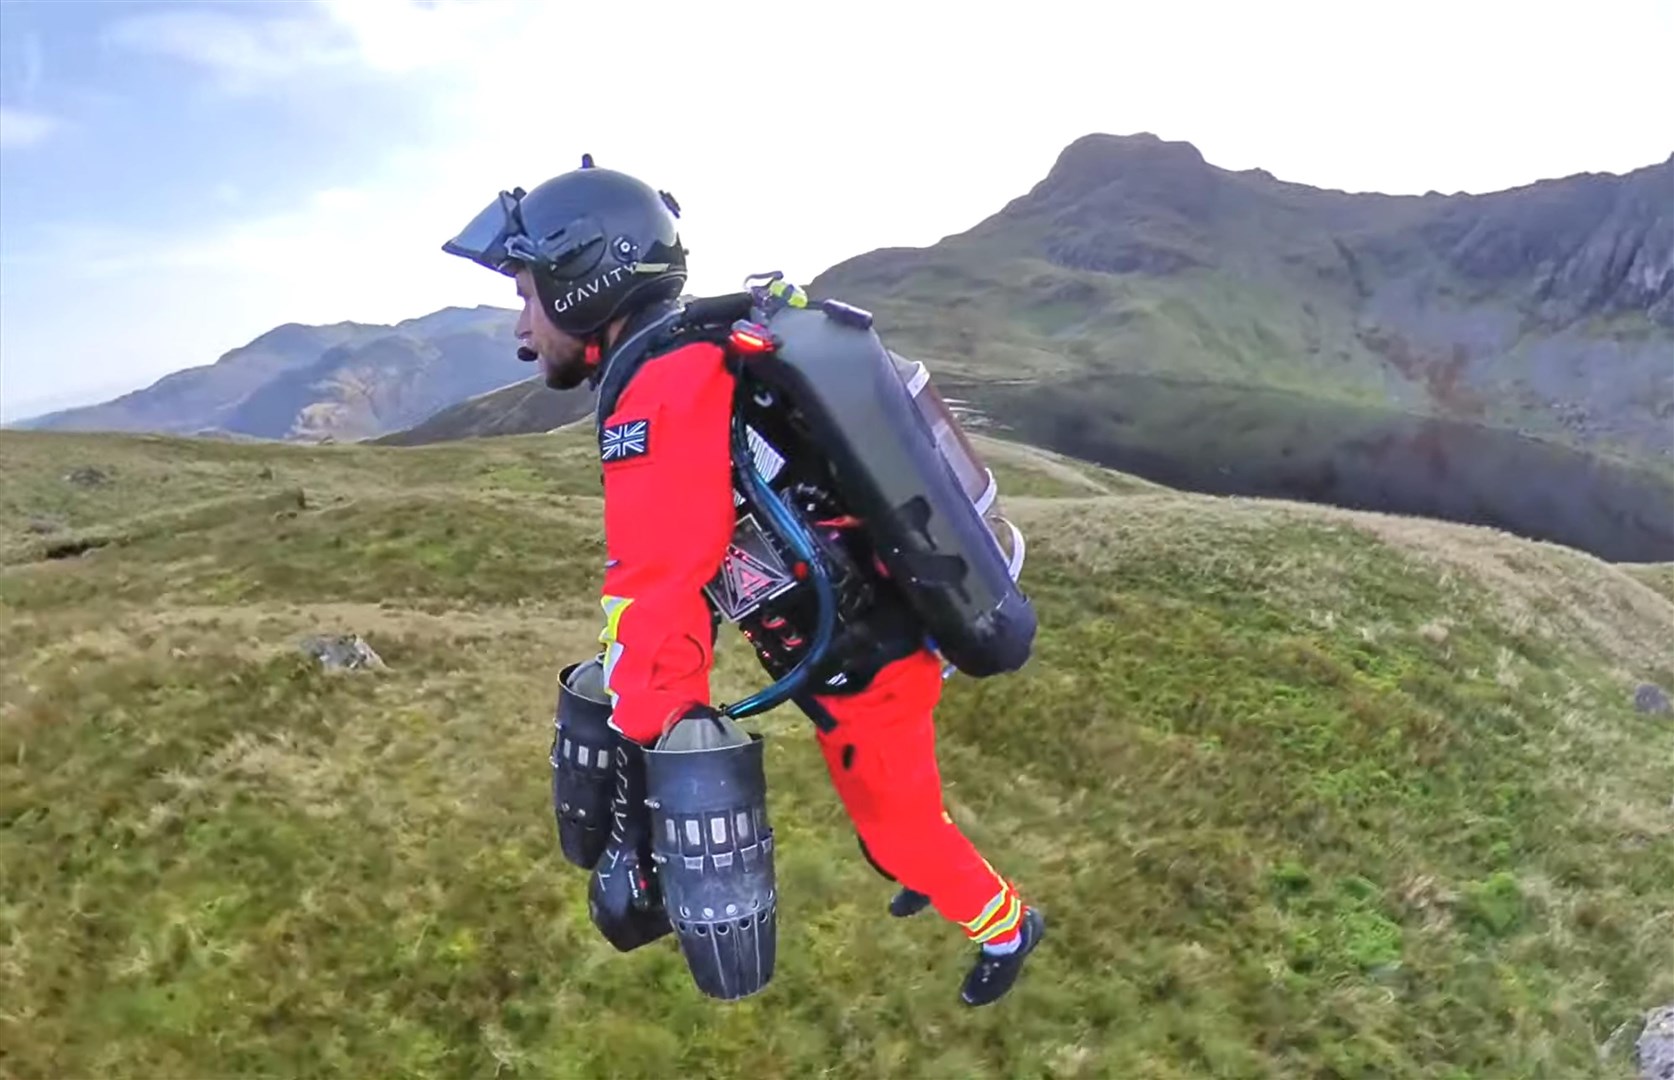 The jet suit is a collaboration between Gravity Industries and the Great North Air Ambulance Service (GNAAS).